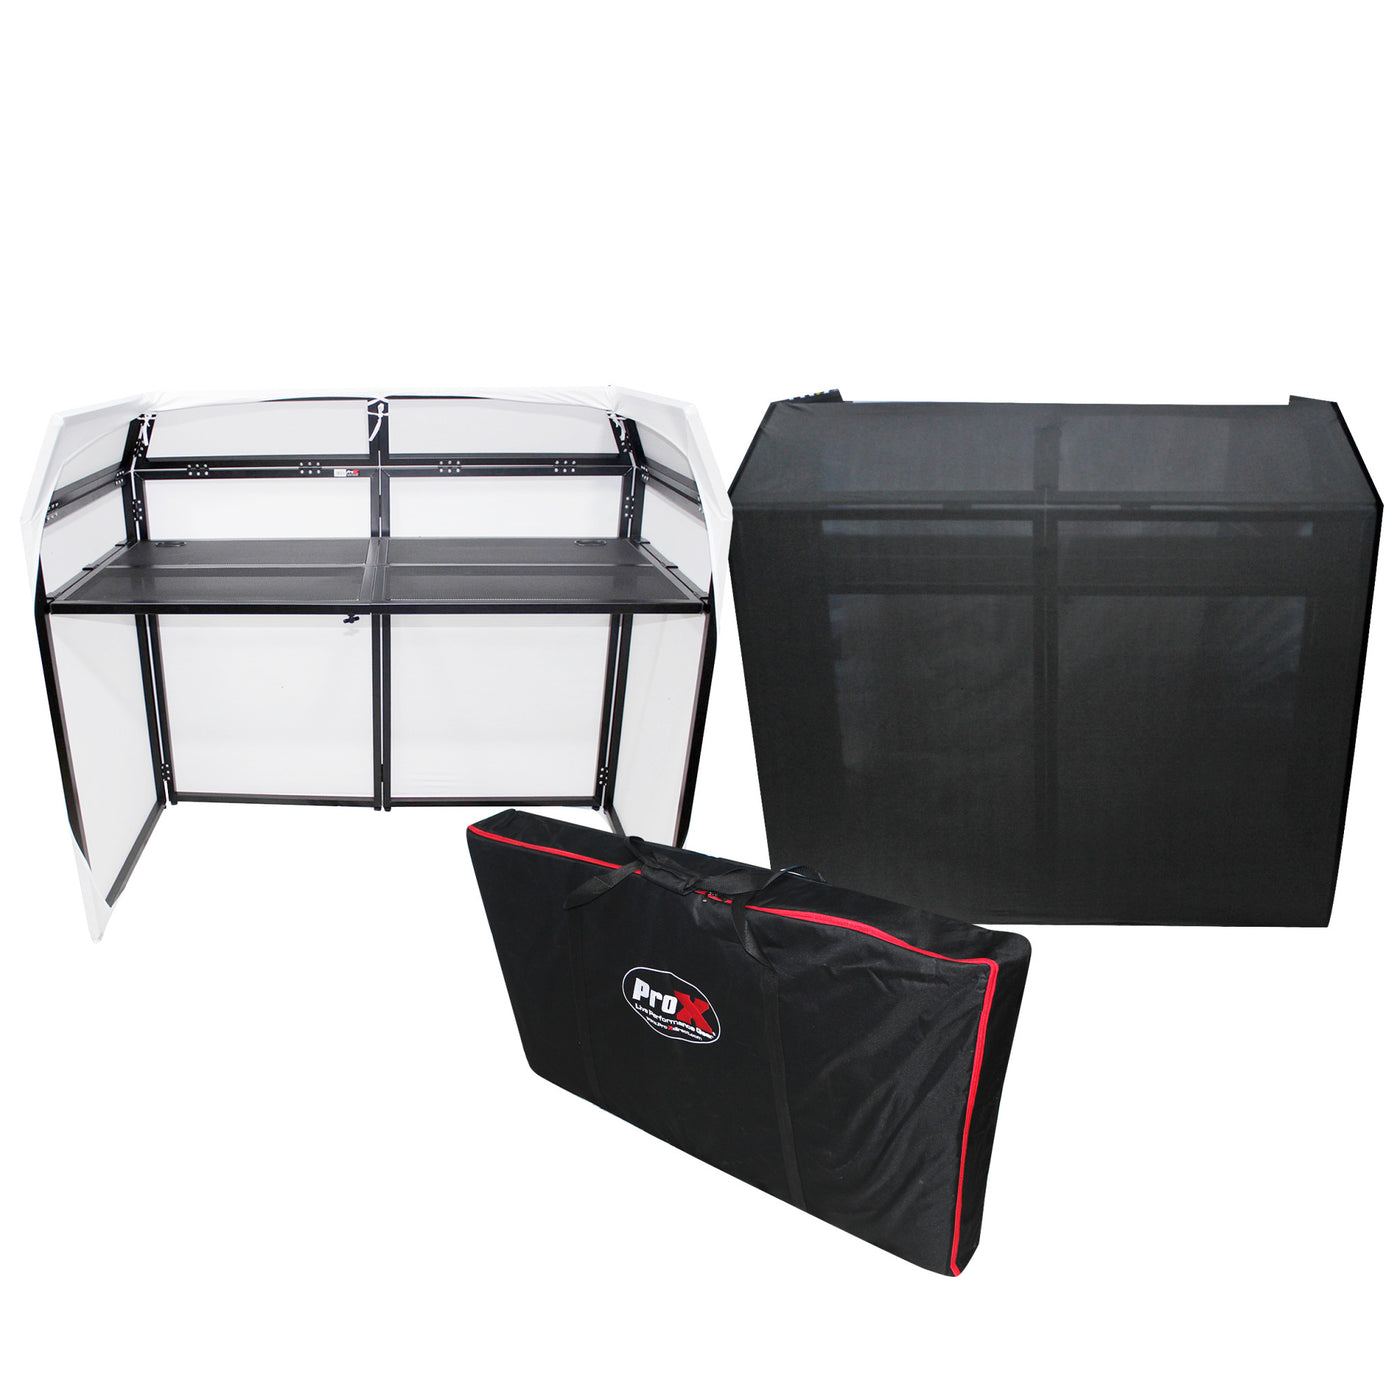 ProX XF-MESAMK2 Mesa MK2 Facade Table Station, Includes White And Black Scrims, With Padded Carry Bag, Pro Audio Equipment